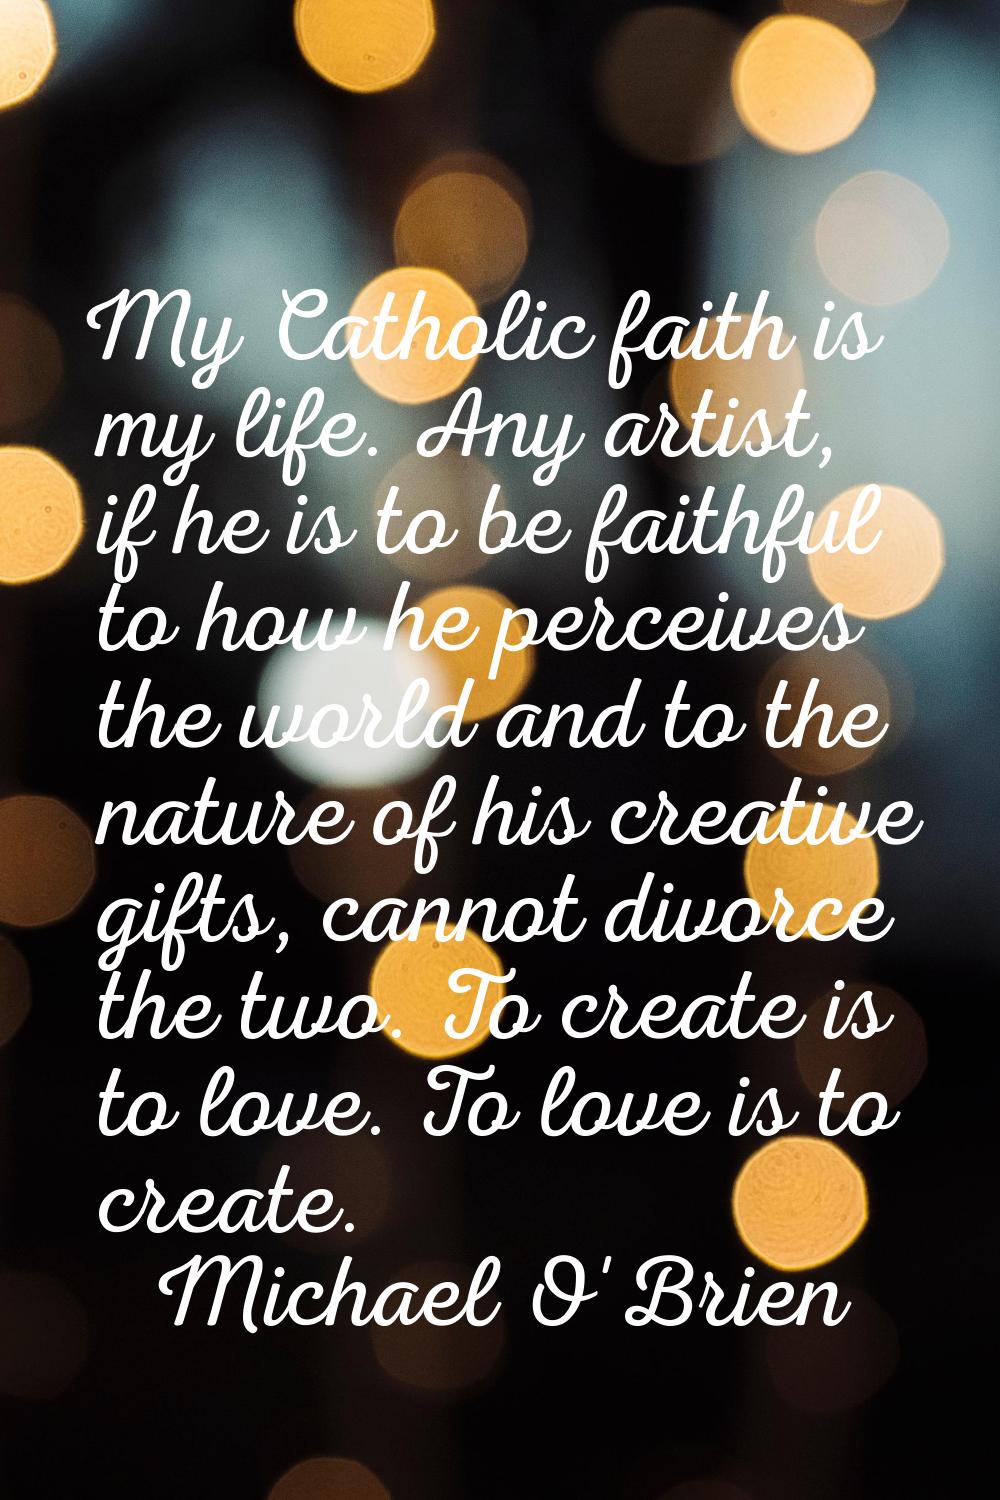 My Catholic faith is my life. Any artist, if he is to be faithful to how he perceives the world and